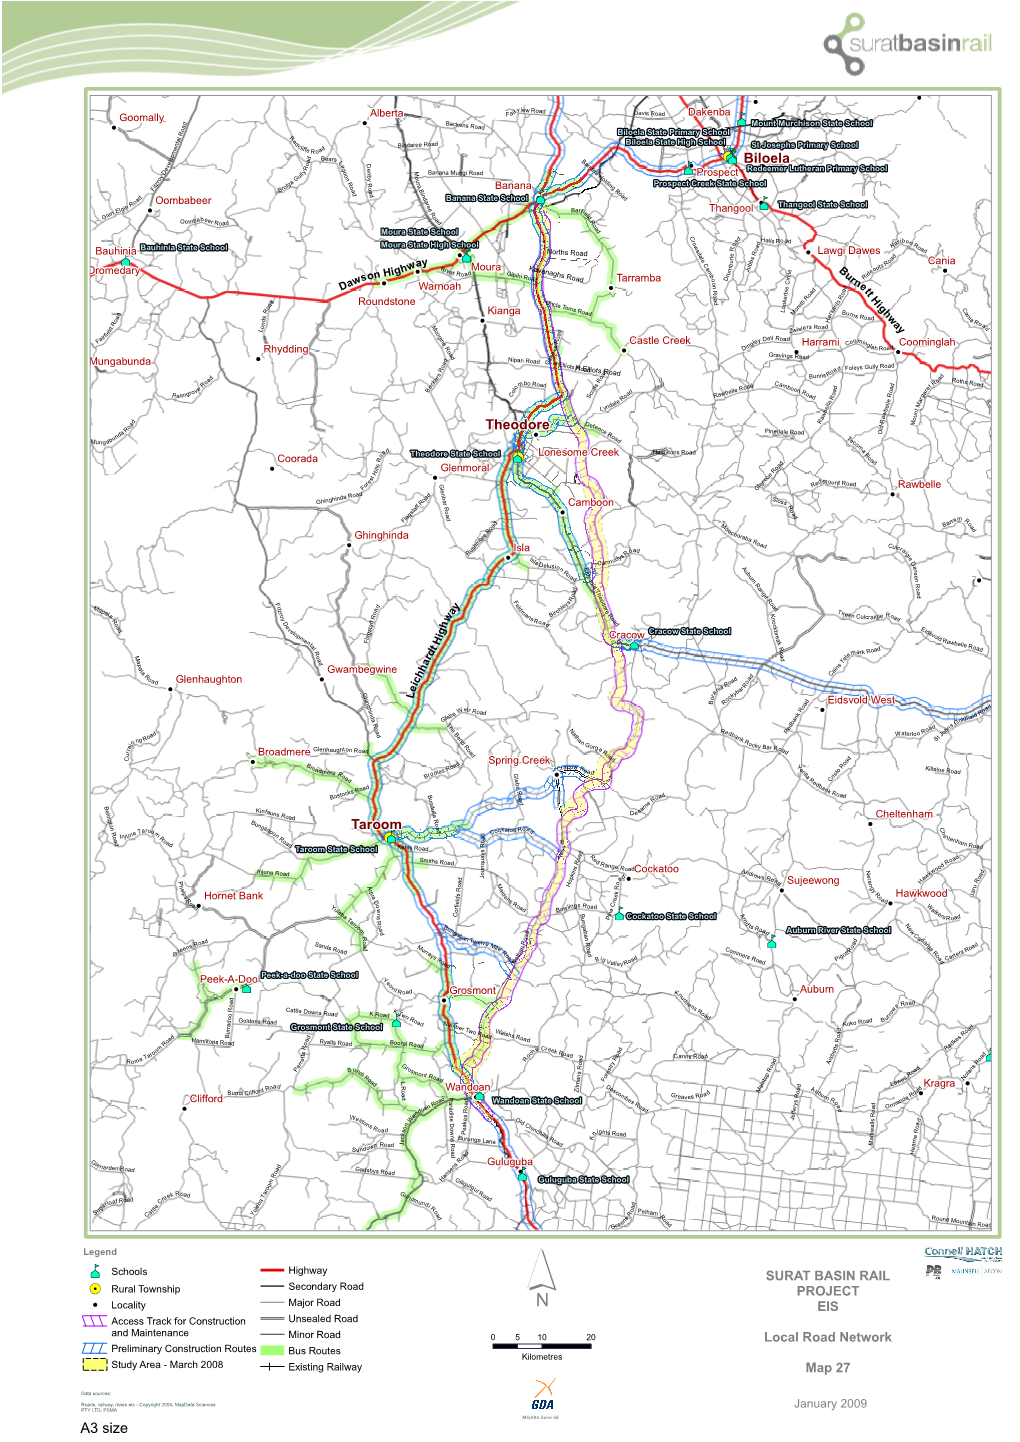 Local Road Network Preliminary Construction Routes Bus Routes Kilometres Study Area - March 2008 Existing Railway Map 27